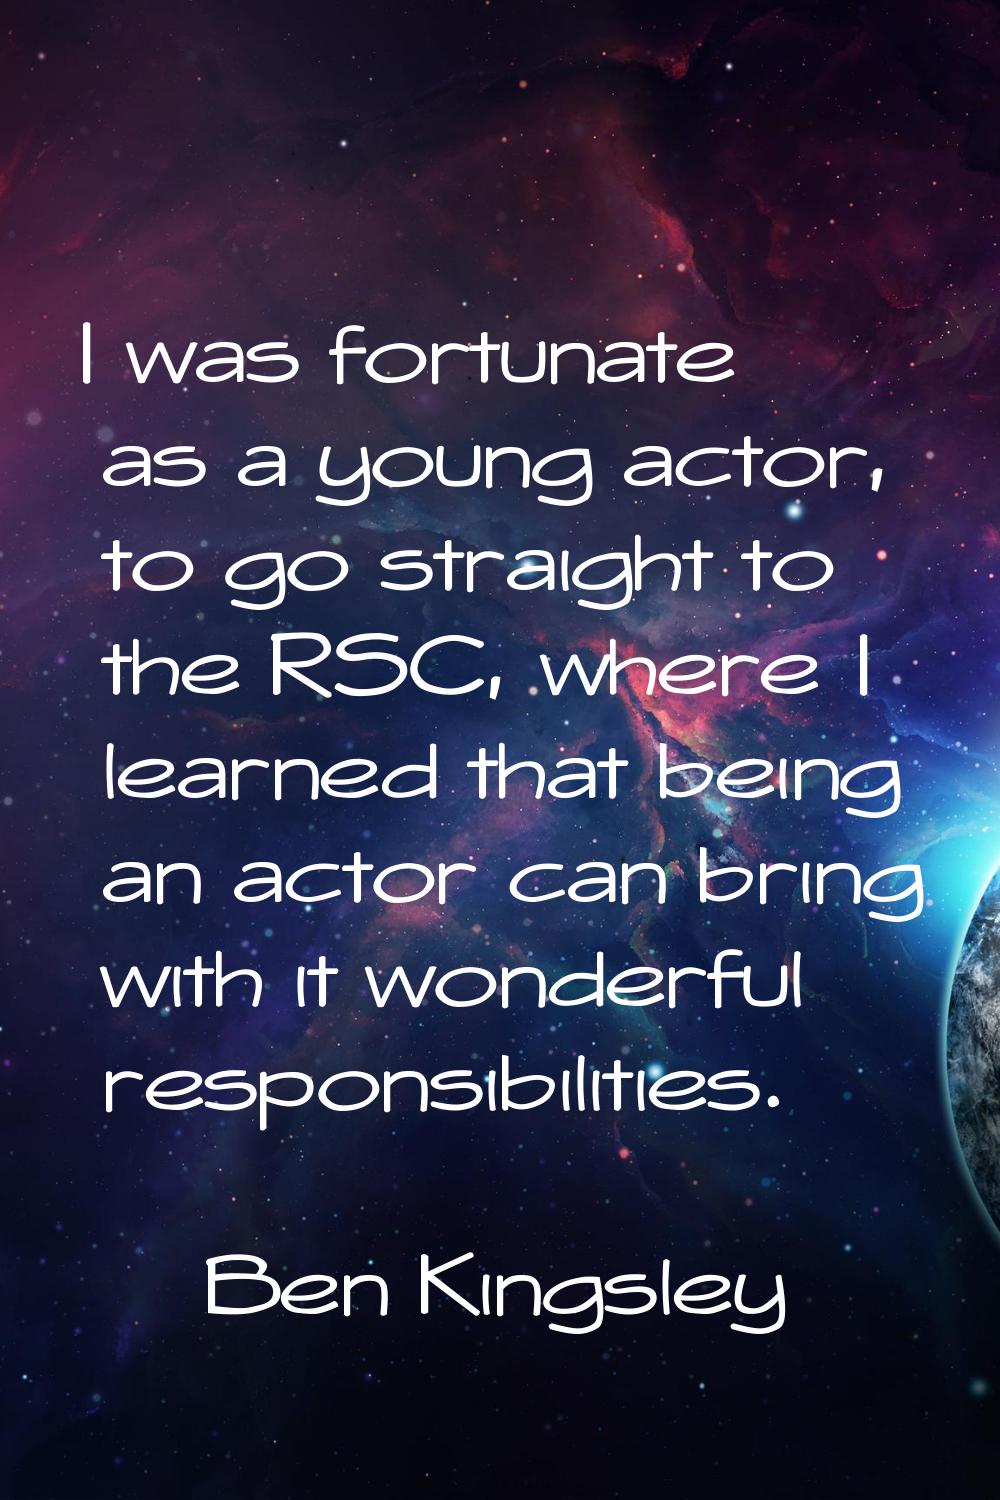 I was fortunate as a young actor, to go straight to the RSC, where I learned that being an actor ca